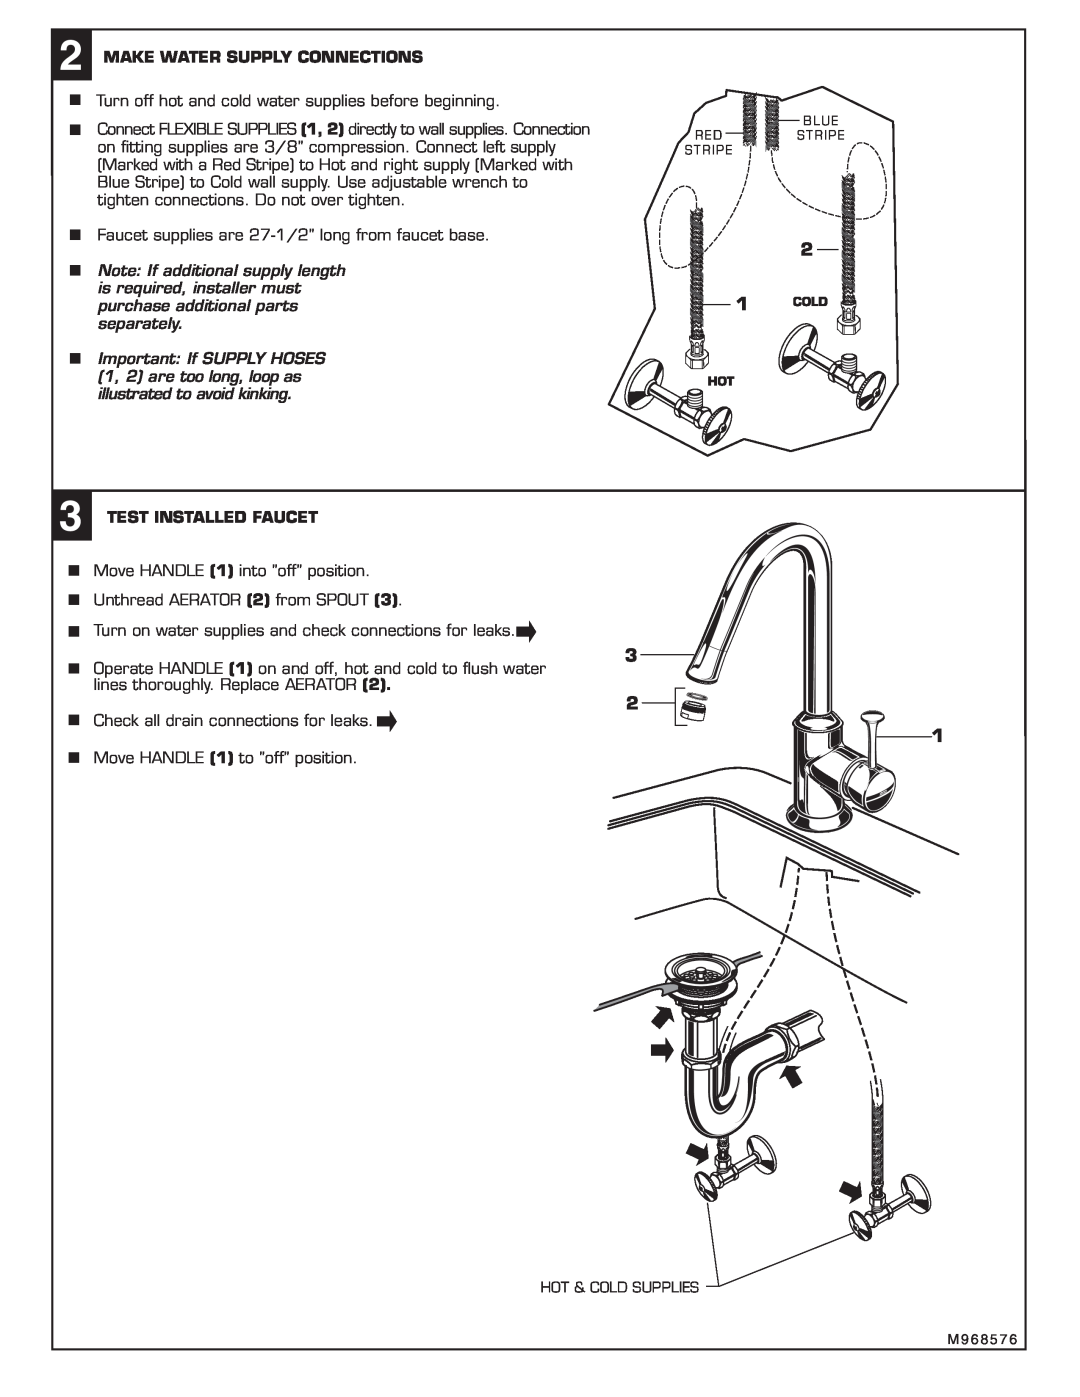 American Standard 4332.001.XXX, 4332.400.XXX Make Water Supply Connections, purchase additional parts1 COLD separately 